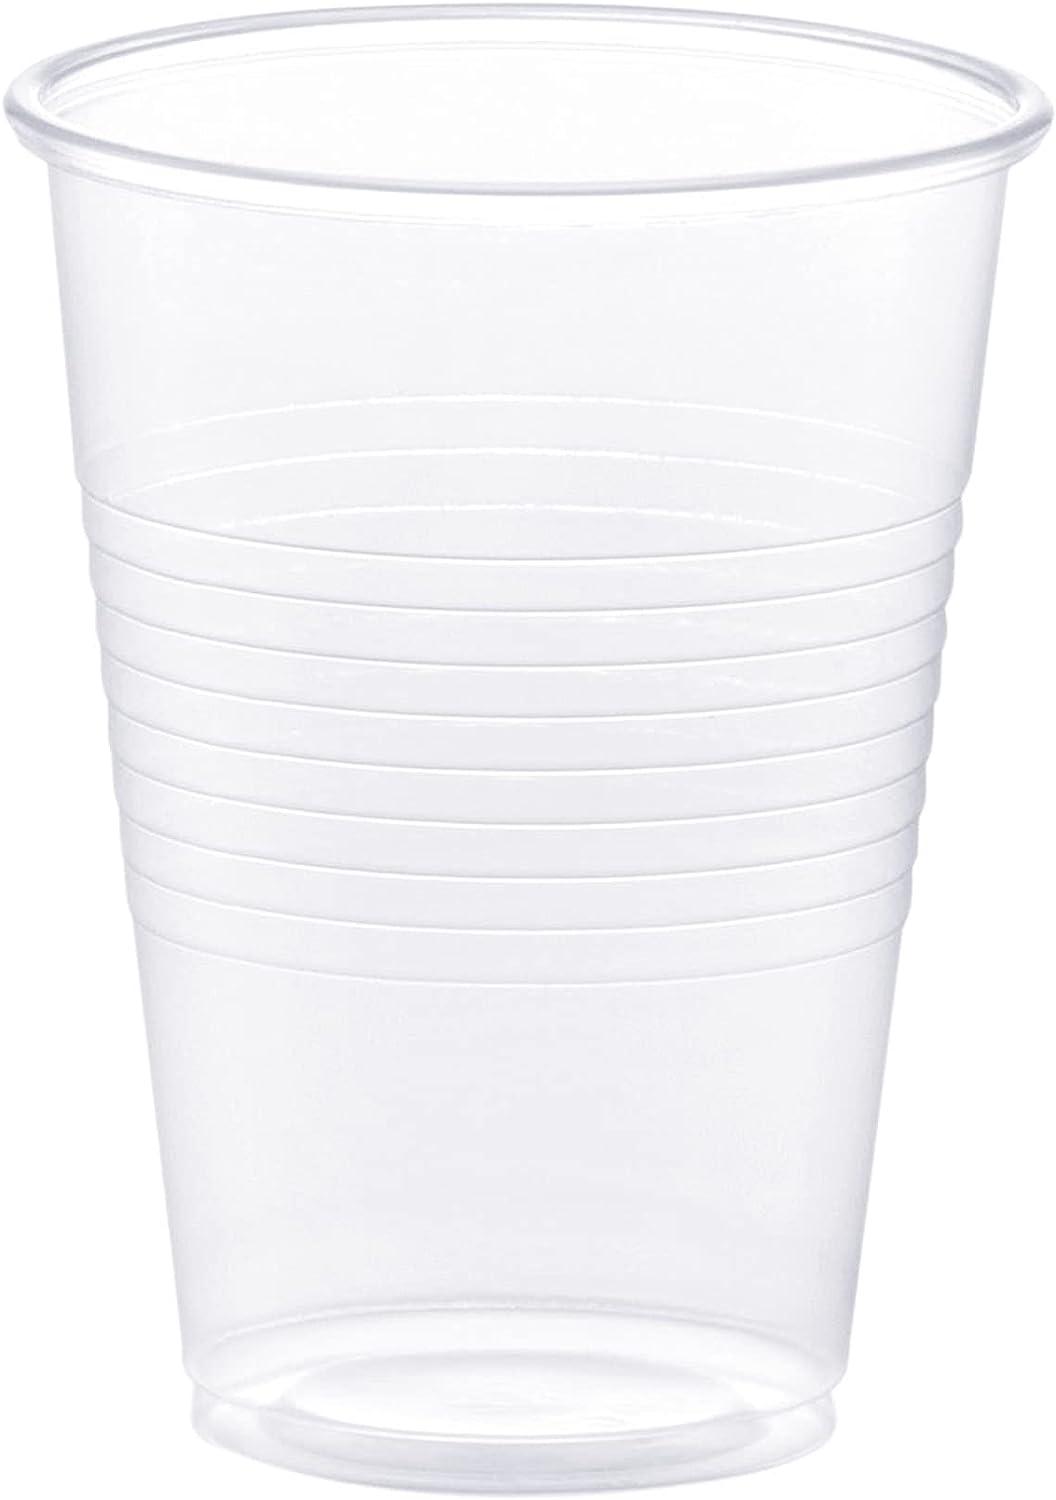 9 oz. Graduated Cups - Case of 500